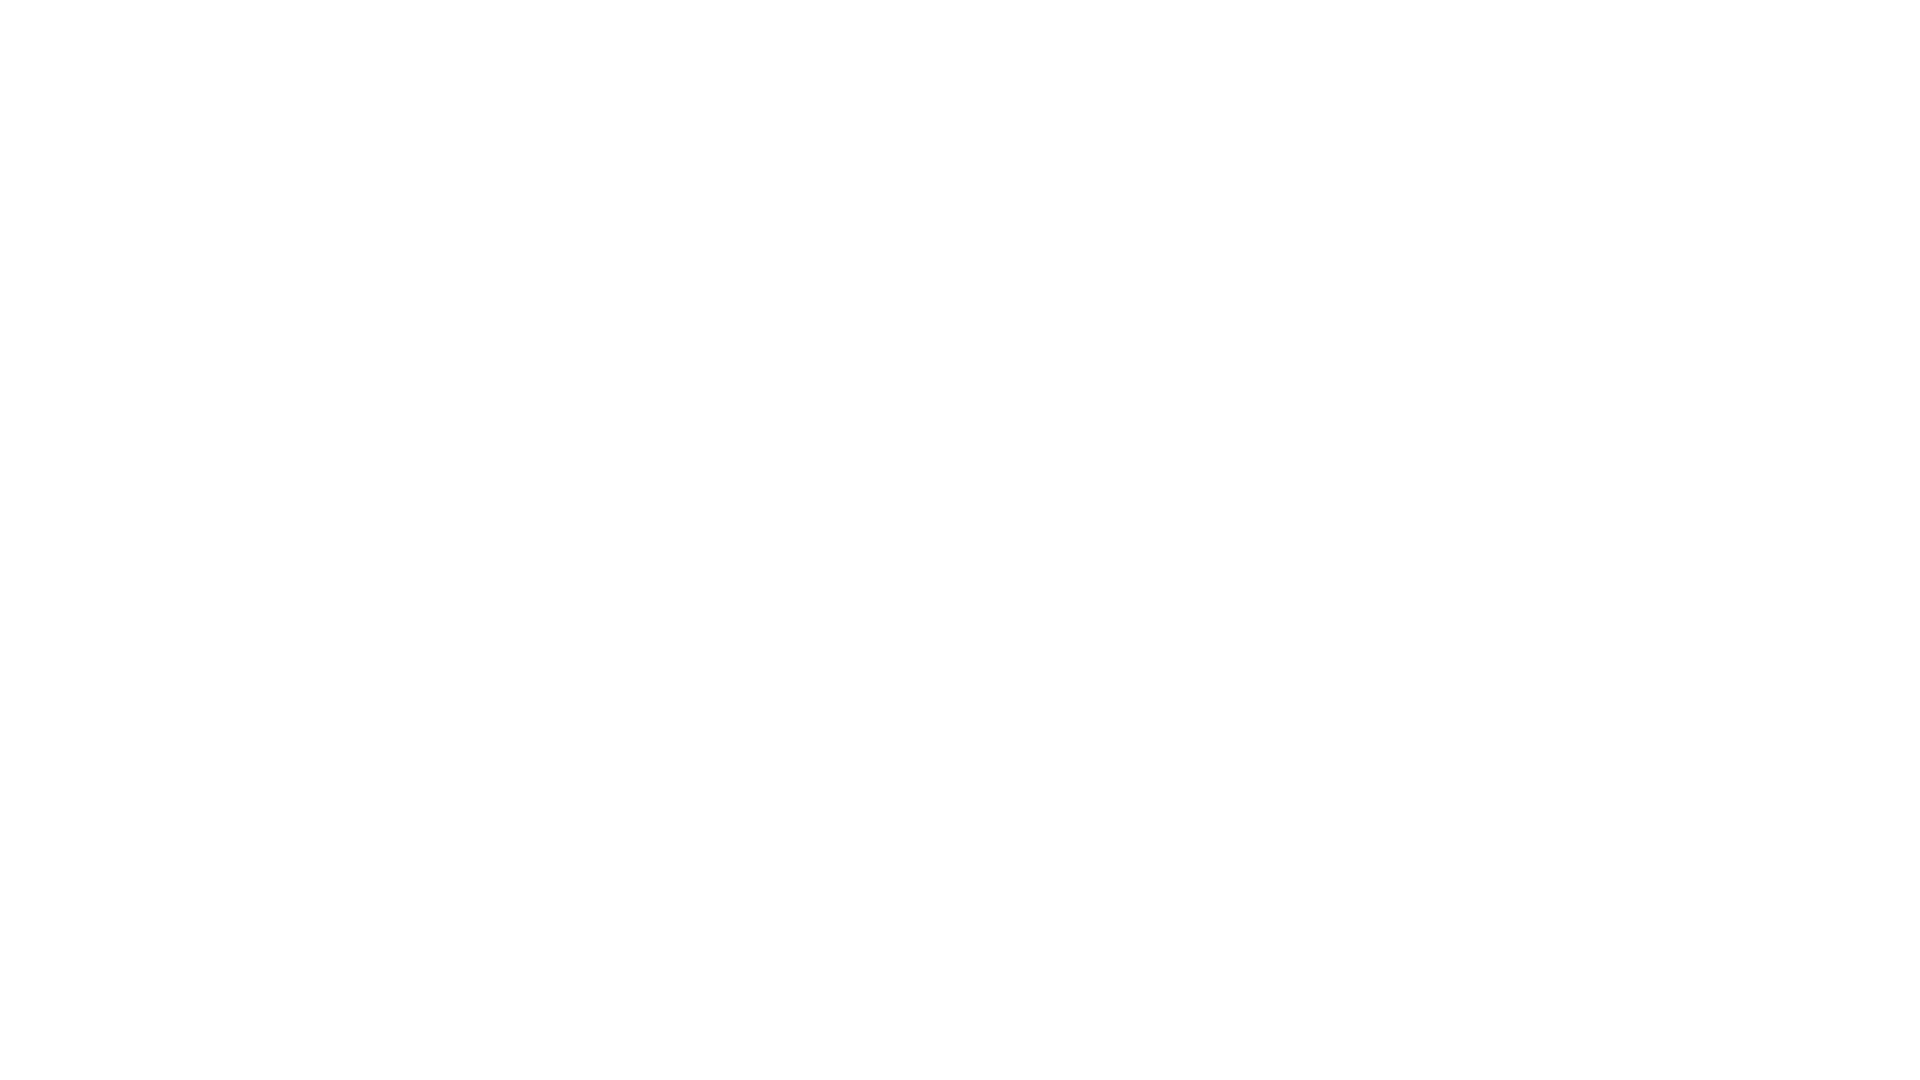 The Innkeeper's Collection logo, with "Innkeeper's" in italic and "Collection" in a thin, modern font.